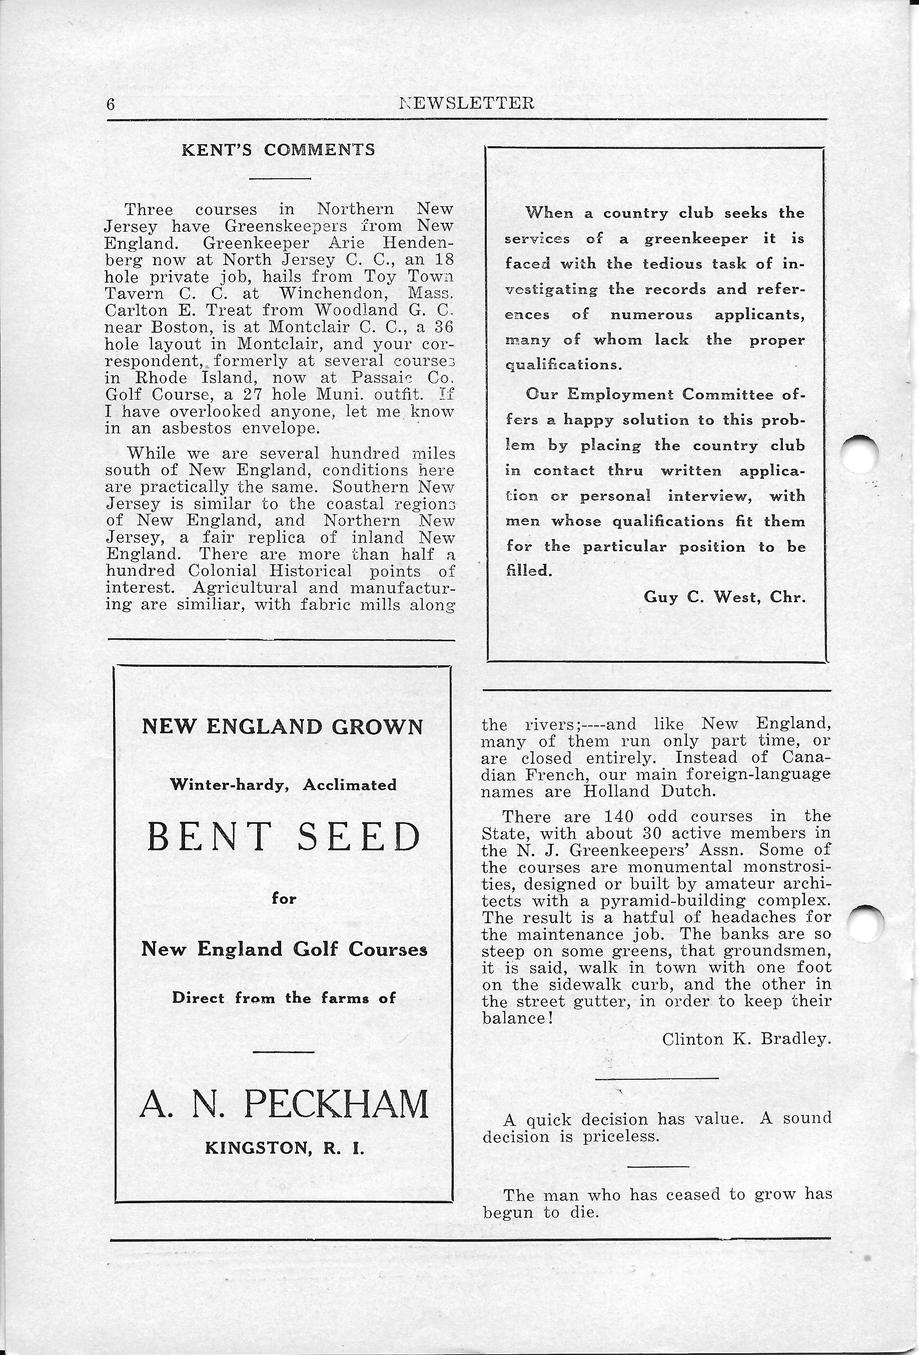 KENT'S COMMENTS Three courses in Northern New Jersey have Greenskeepers from New England. Greenkeeper Arie Hendenberg now at North Jersey C. C., an 18 hole private job, hails from Toy Town Tavern C.